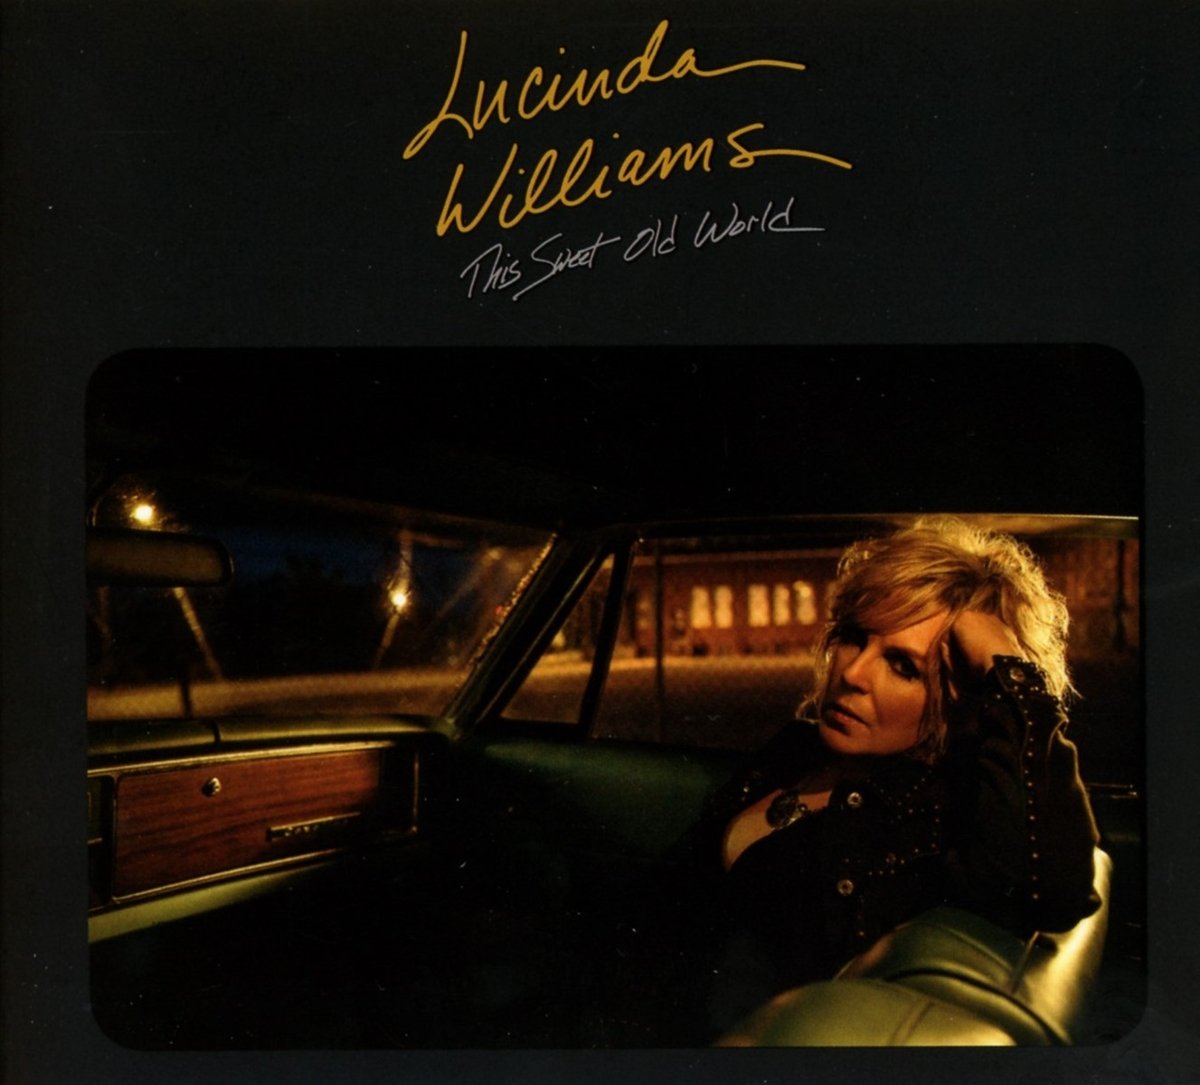 Art for What You Don't Know by Lucinda Williams